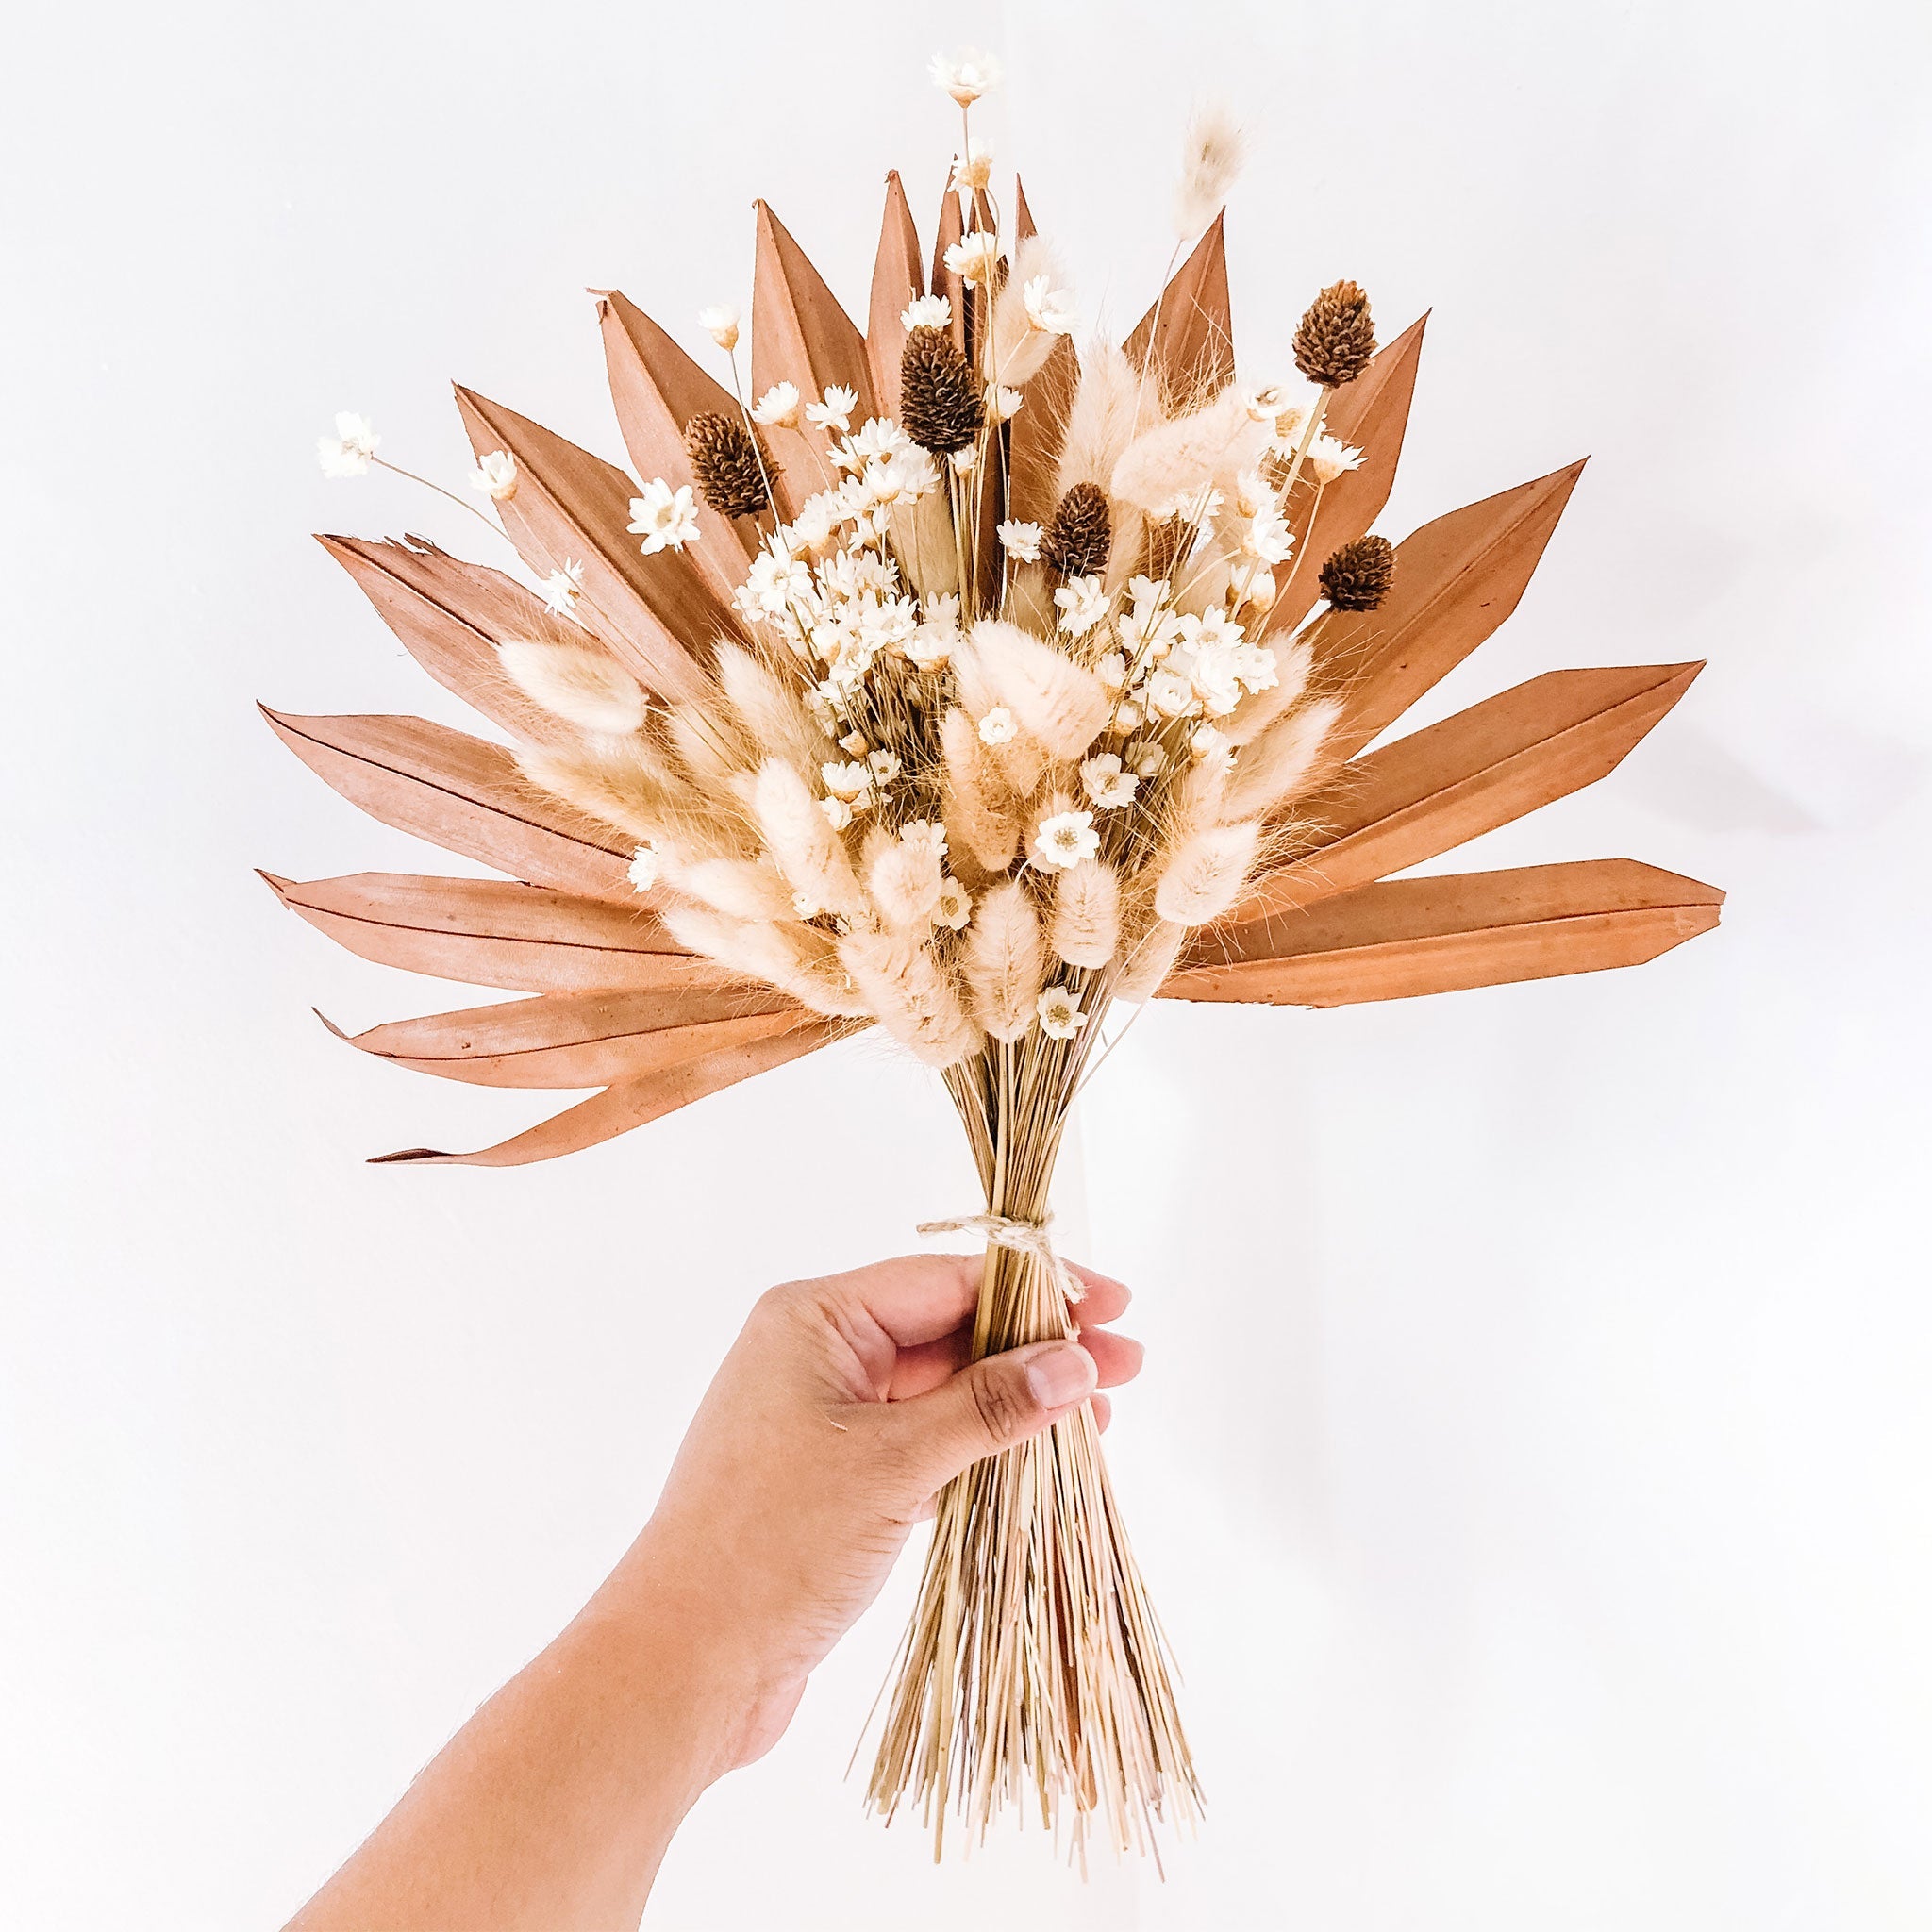 a hand holds a dried floral bouquet in a beige and brown color scheme